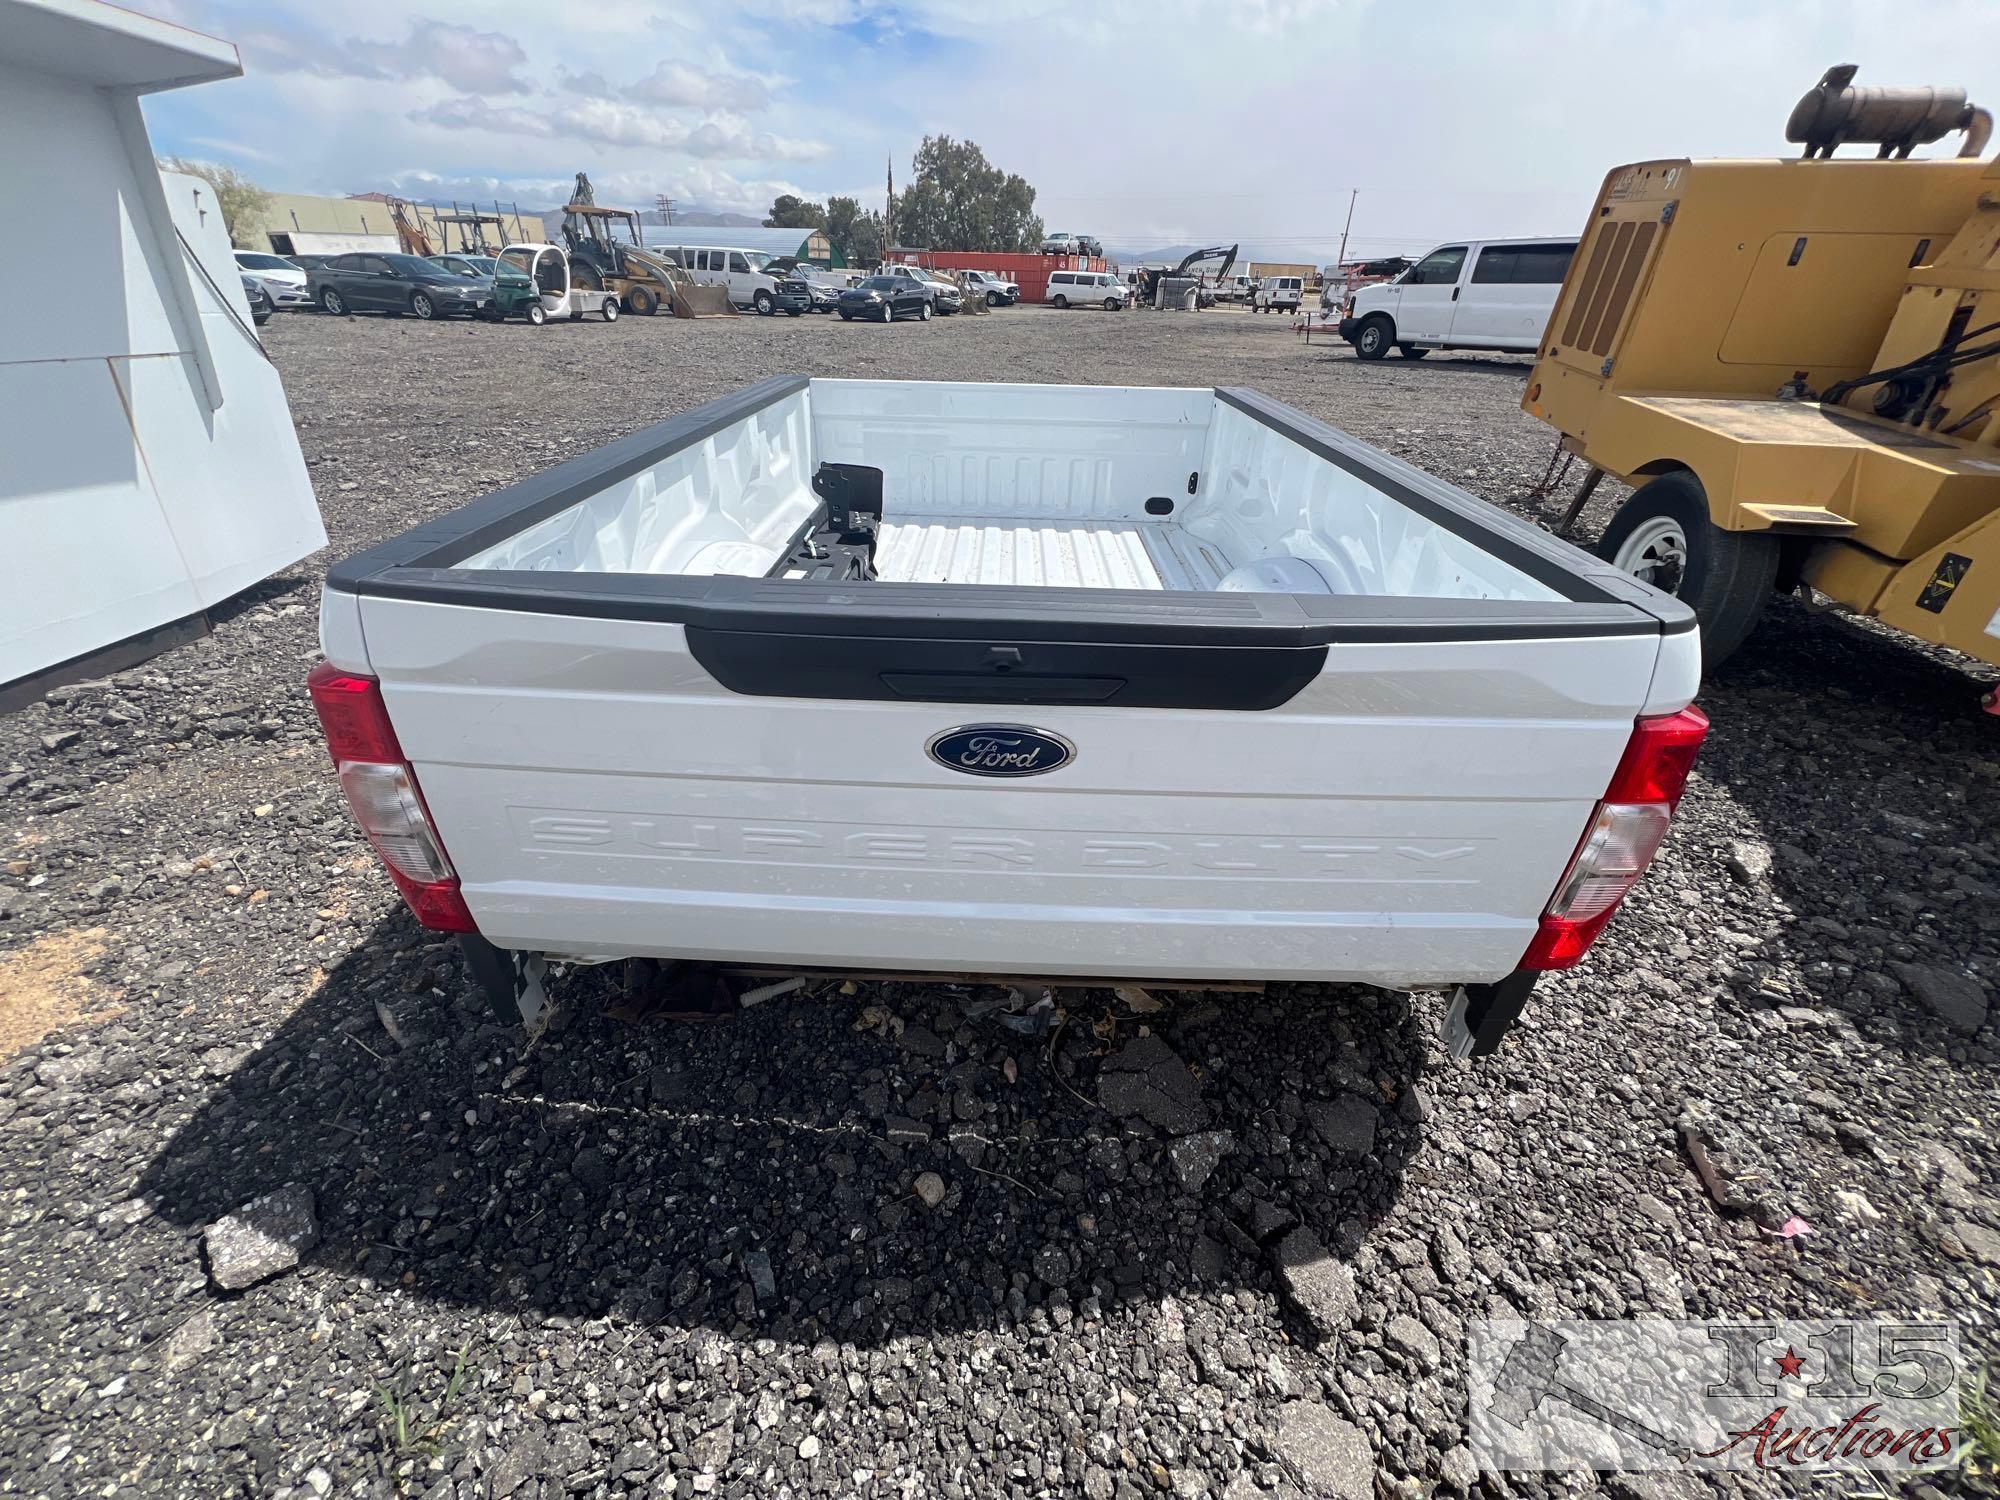 Ford Super Duty Truck Bed With Rear Bumper